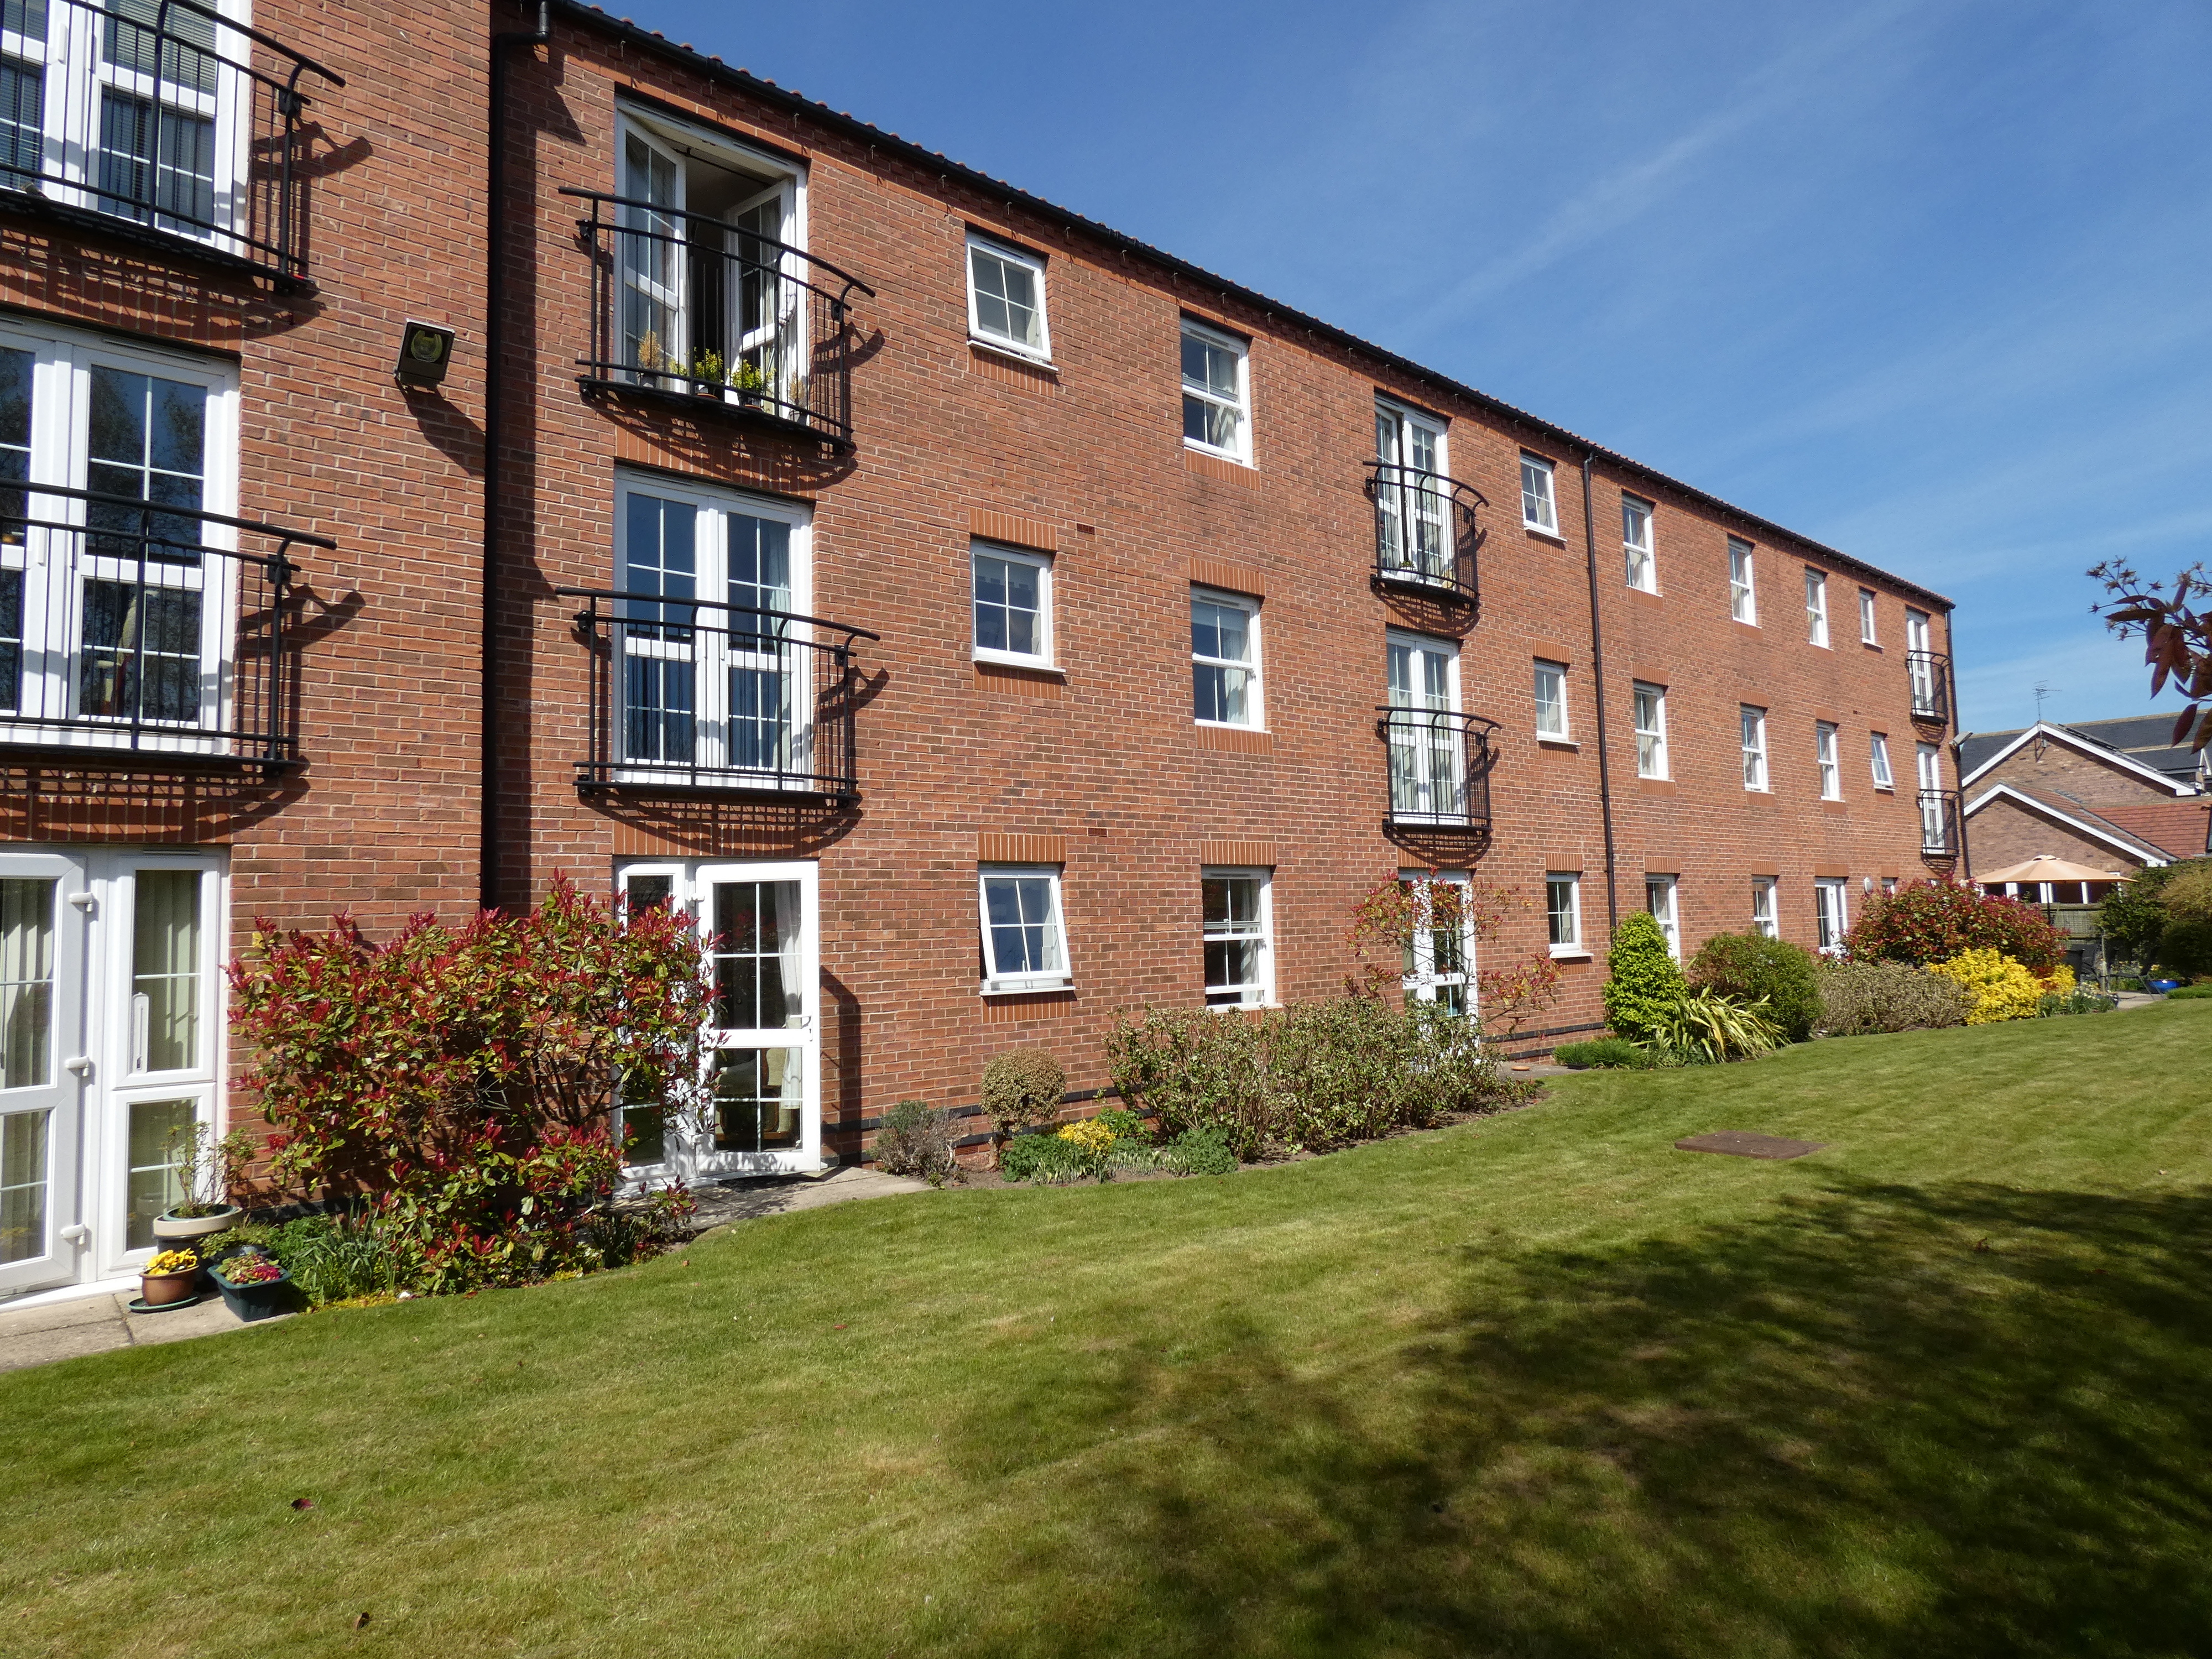 Greendale Court, Bedale